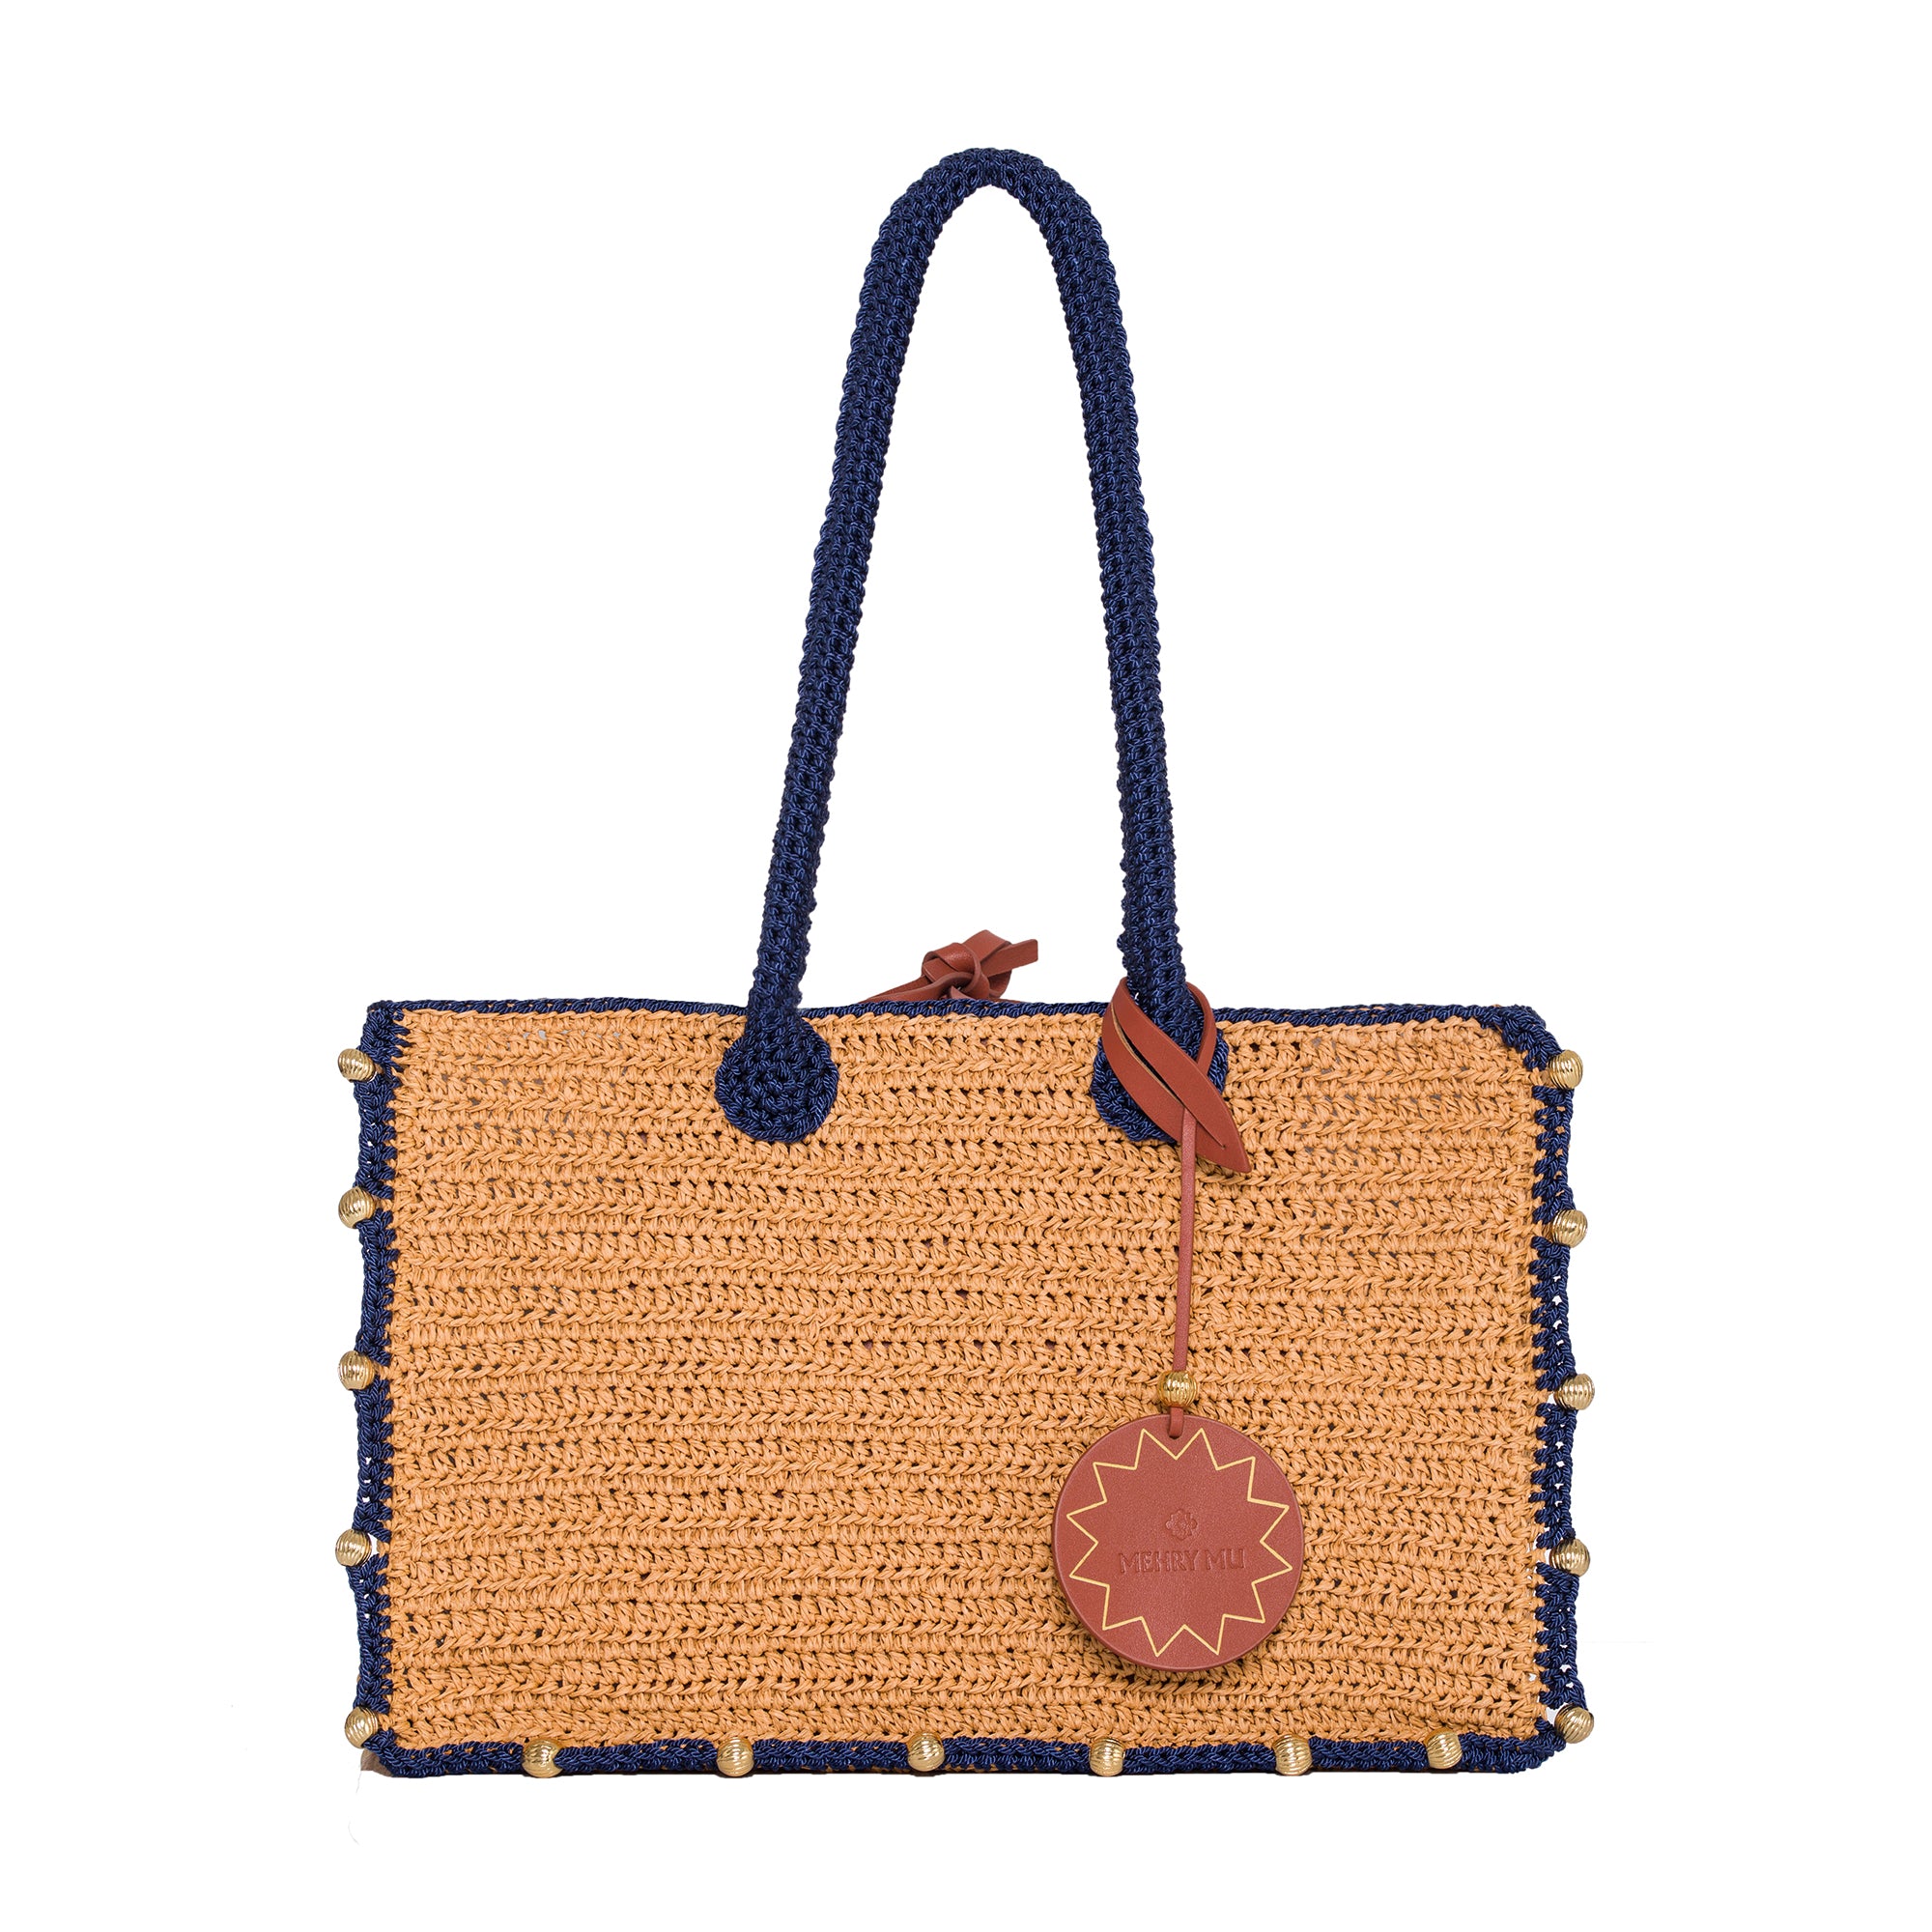 Terra Beads Tote with Long Handles